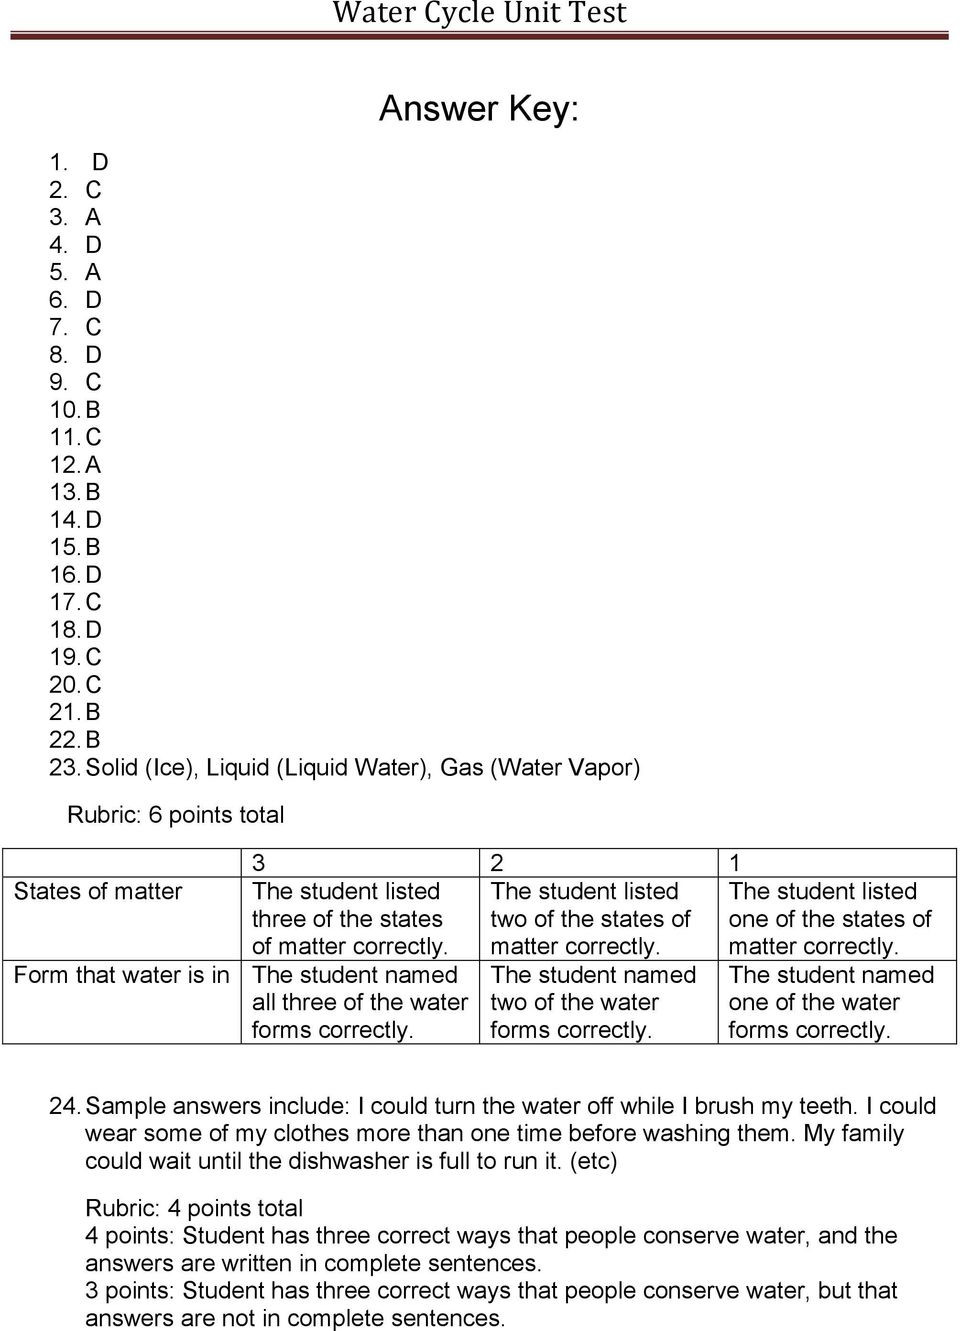 Water Cycle Worksheet Answer Key Water Cycle Unit Test Pdf Free Download